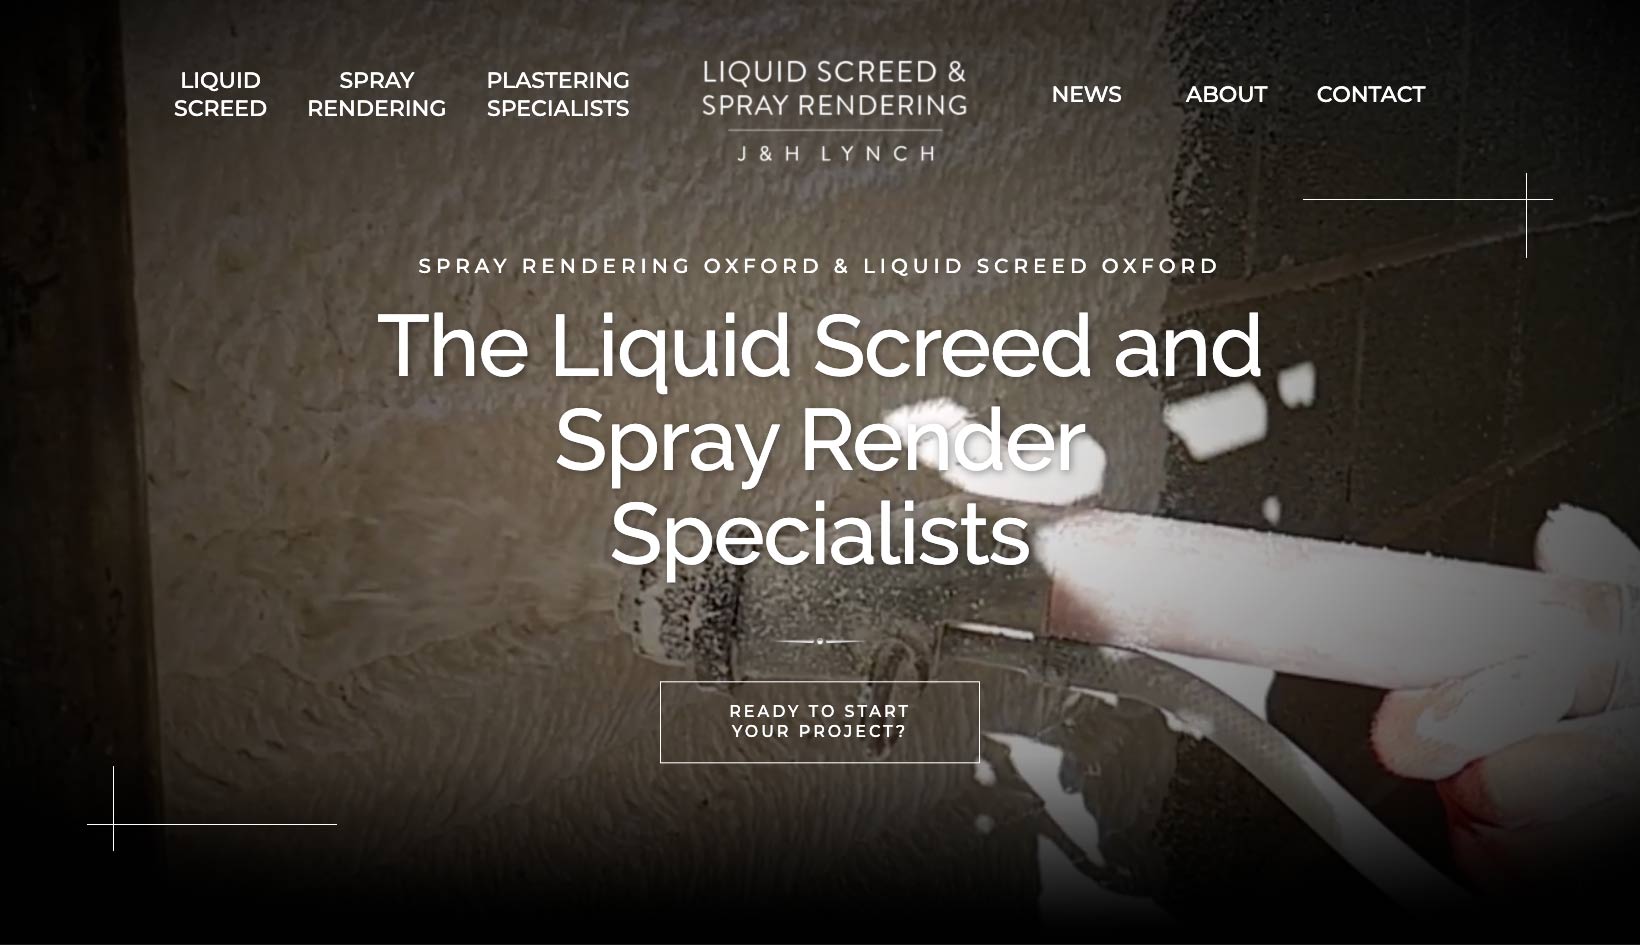 The home page of the J&H Lynch Liquid Screed and Spray Rendering website